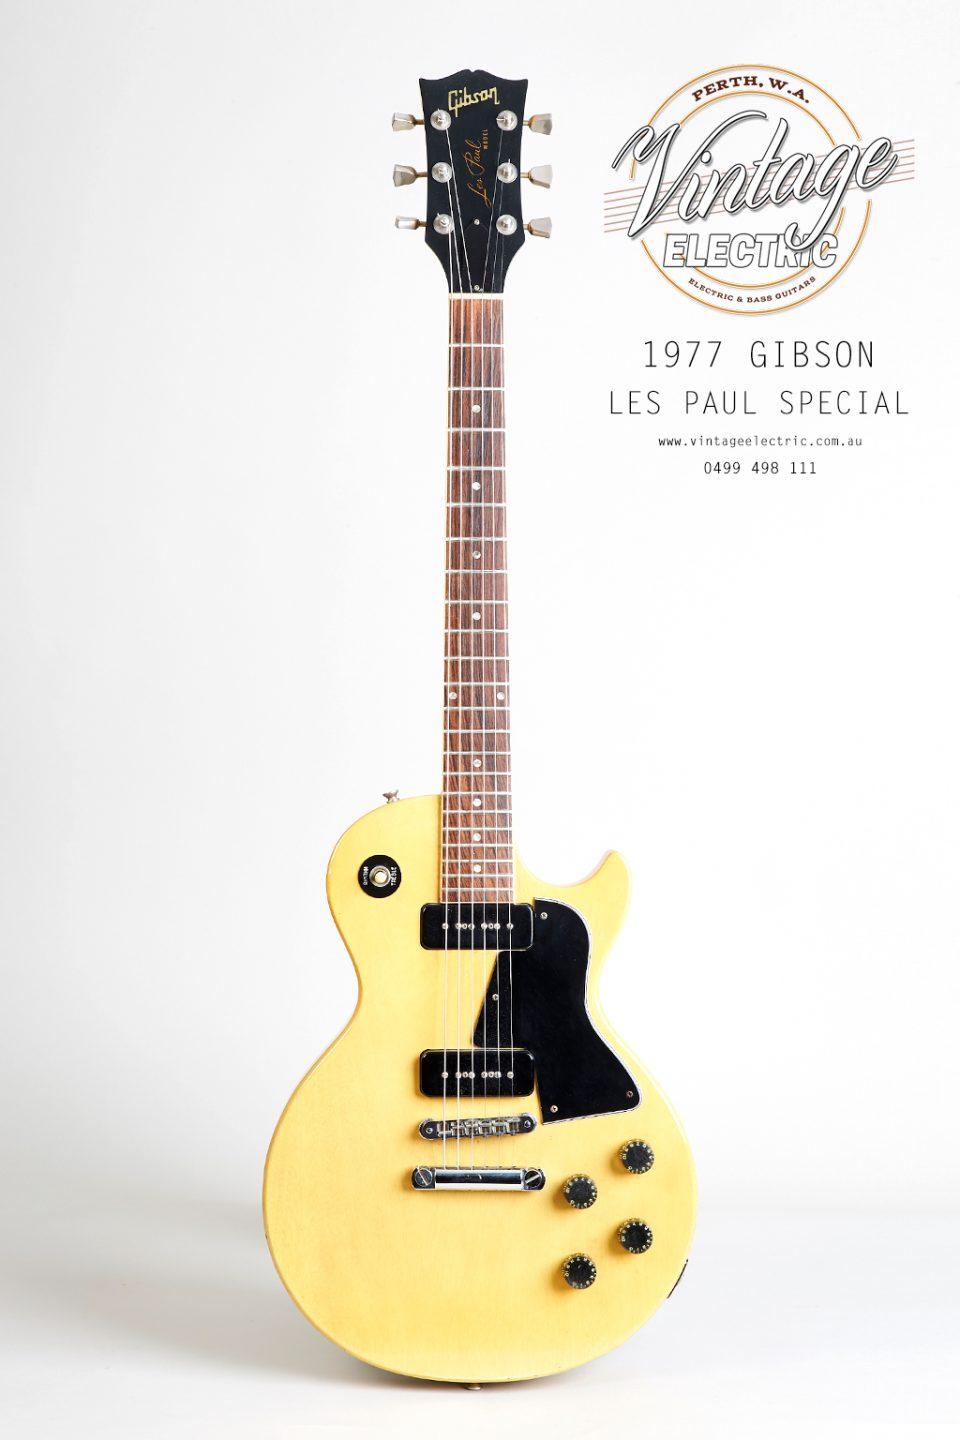 1977 Gibson Les Paul Special